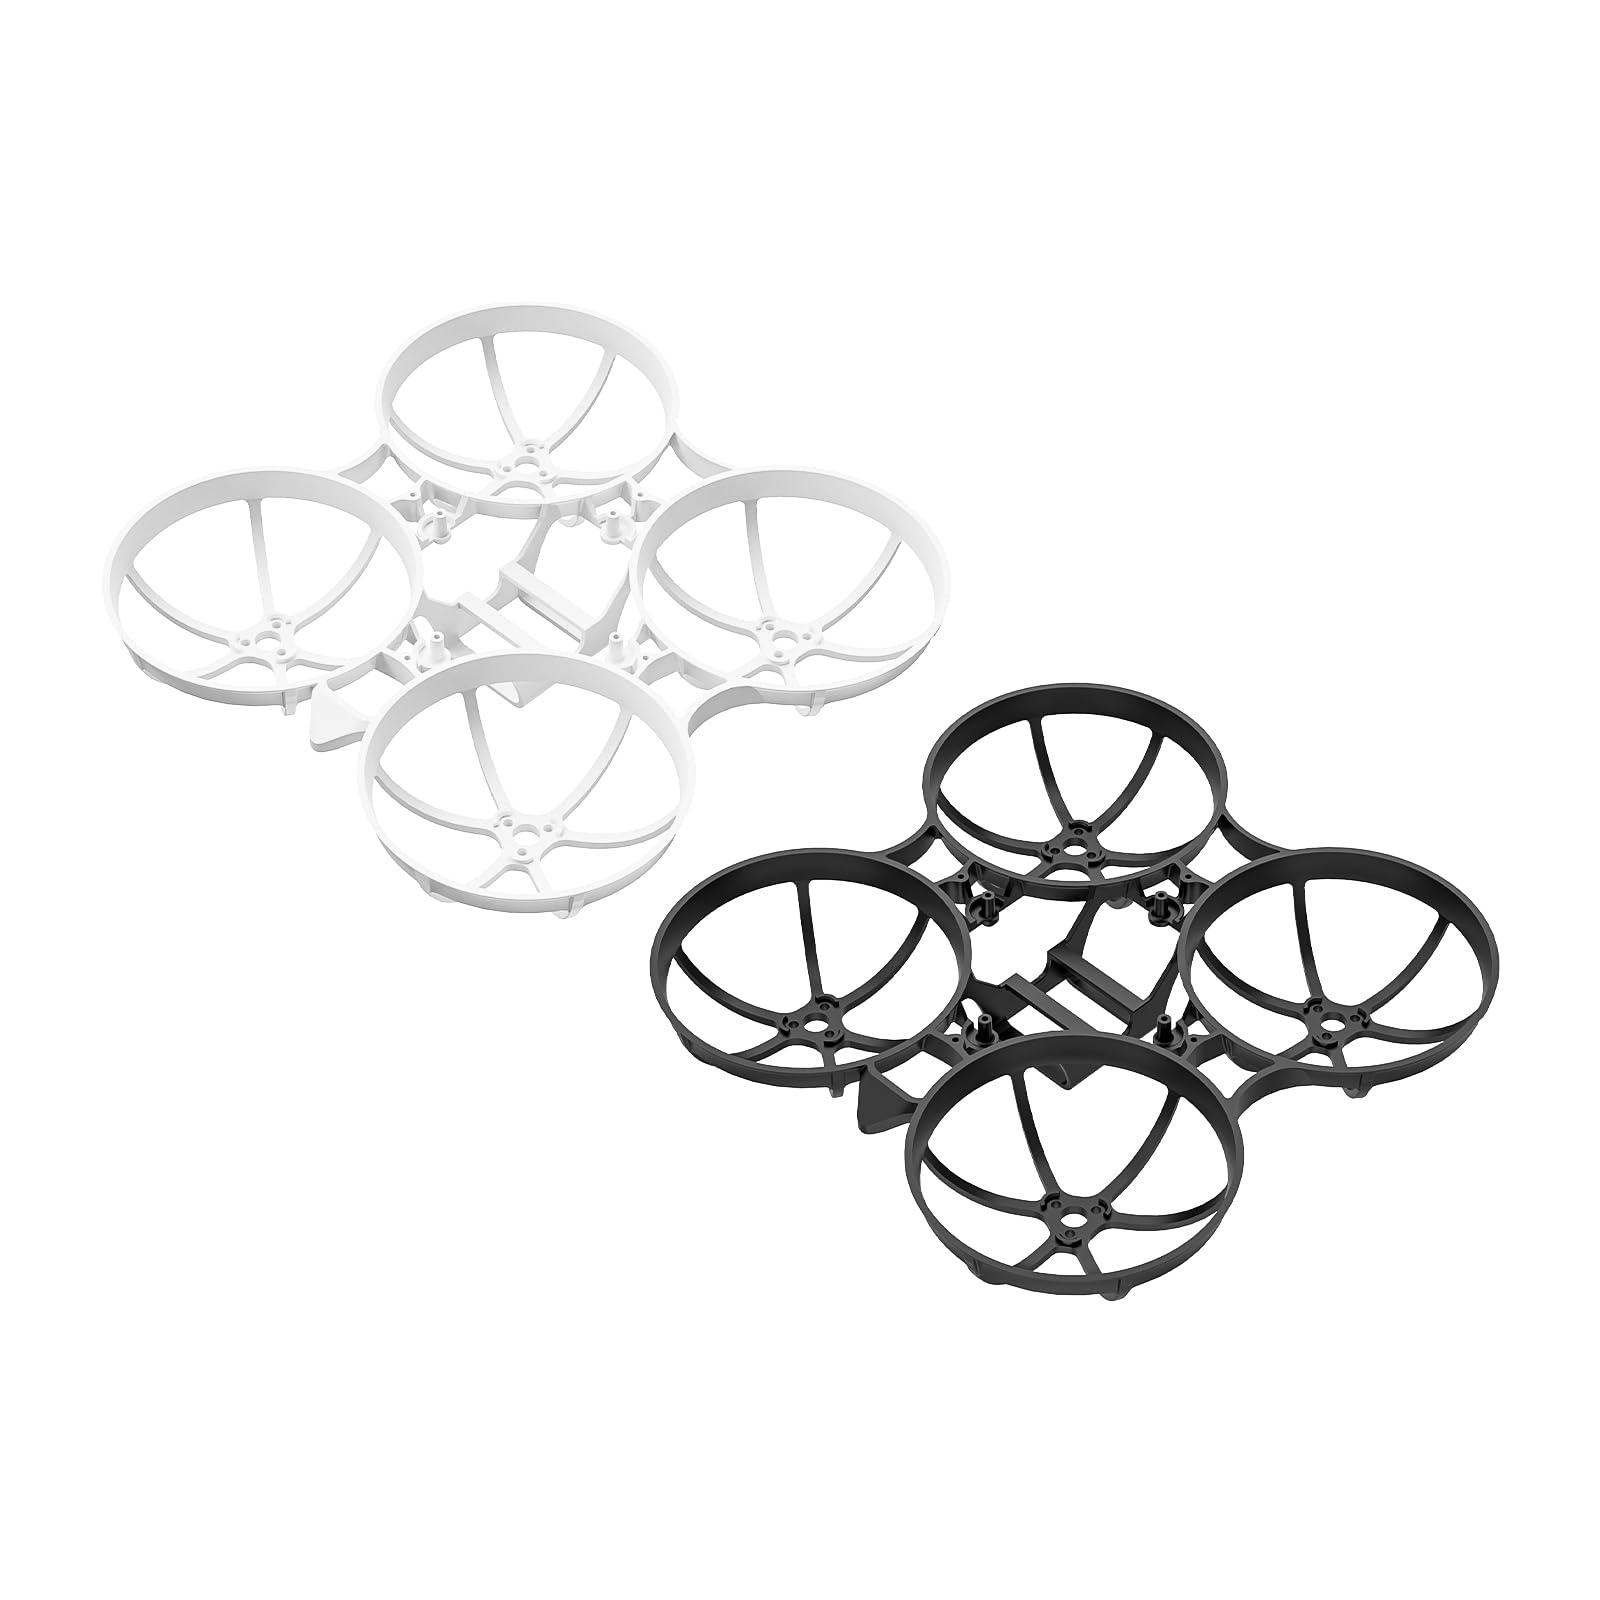 BETAFPV 2pcs Meteor75 Air Brushless Whoop Frame Kit with Motor Fix Slot&Gasket, Ultra Light, Lowered Profile, for DIY Ultra Light 75mm 1S Racing Whoop Drone with 07XX 08XX 1102 Motors 40mm Propeller von BETAFPV